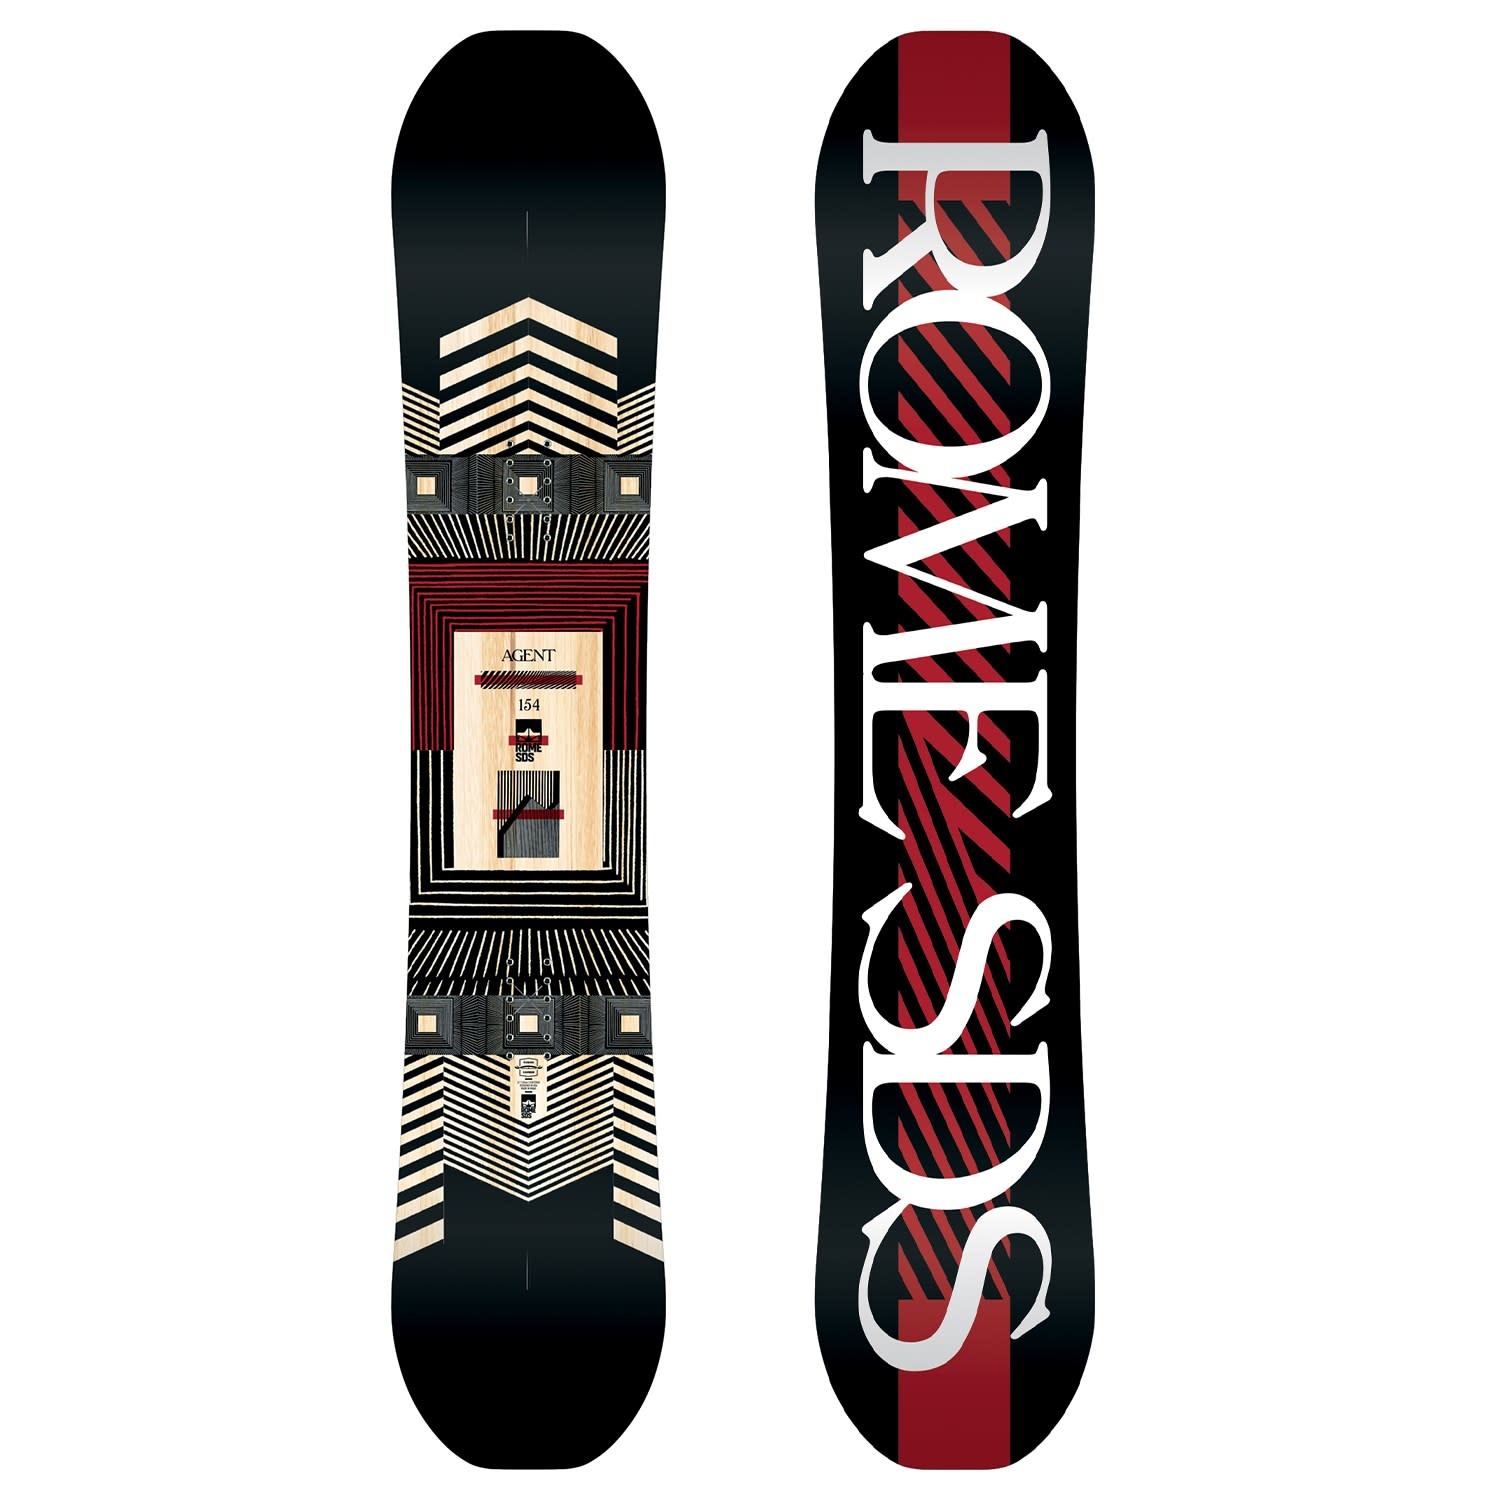 Rome Snowboards Size Chart